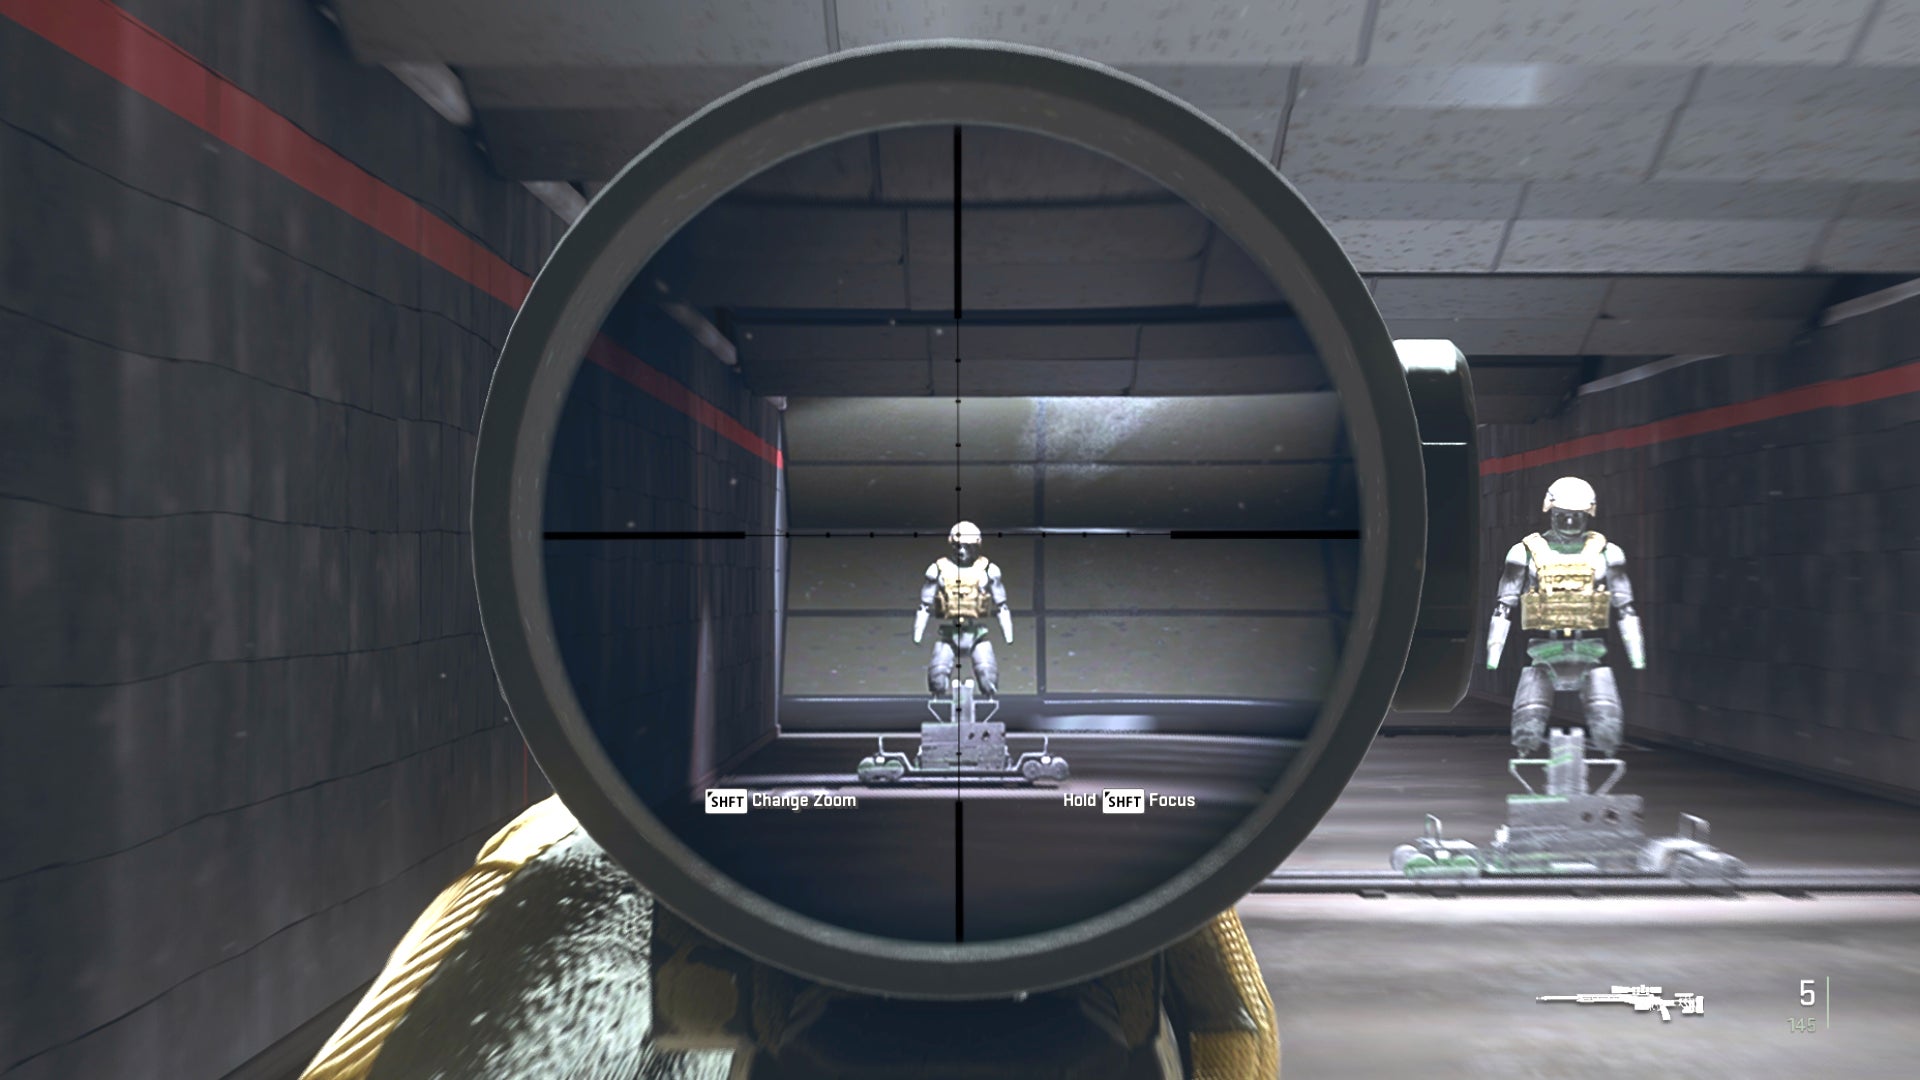 The player in Warzone 2.0 aims at a training dummy with the SP-X 80 default scope.